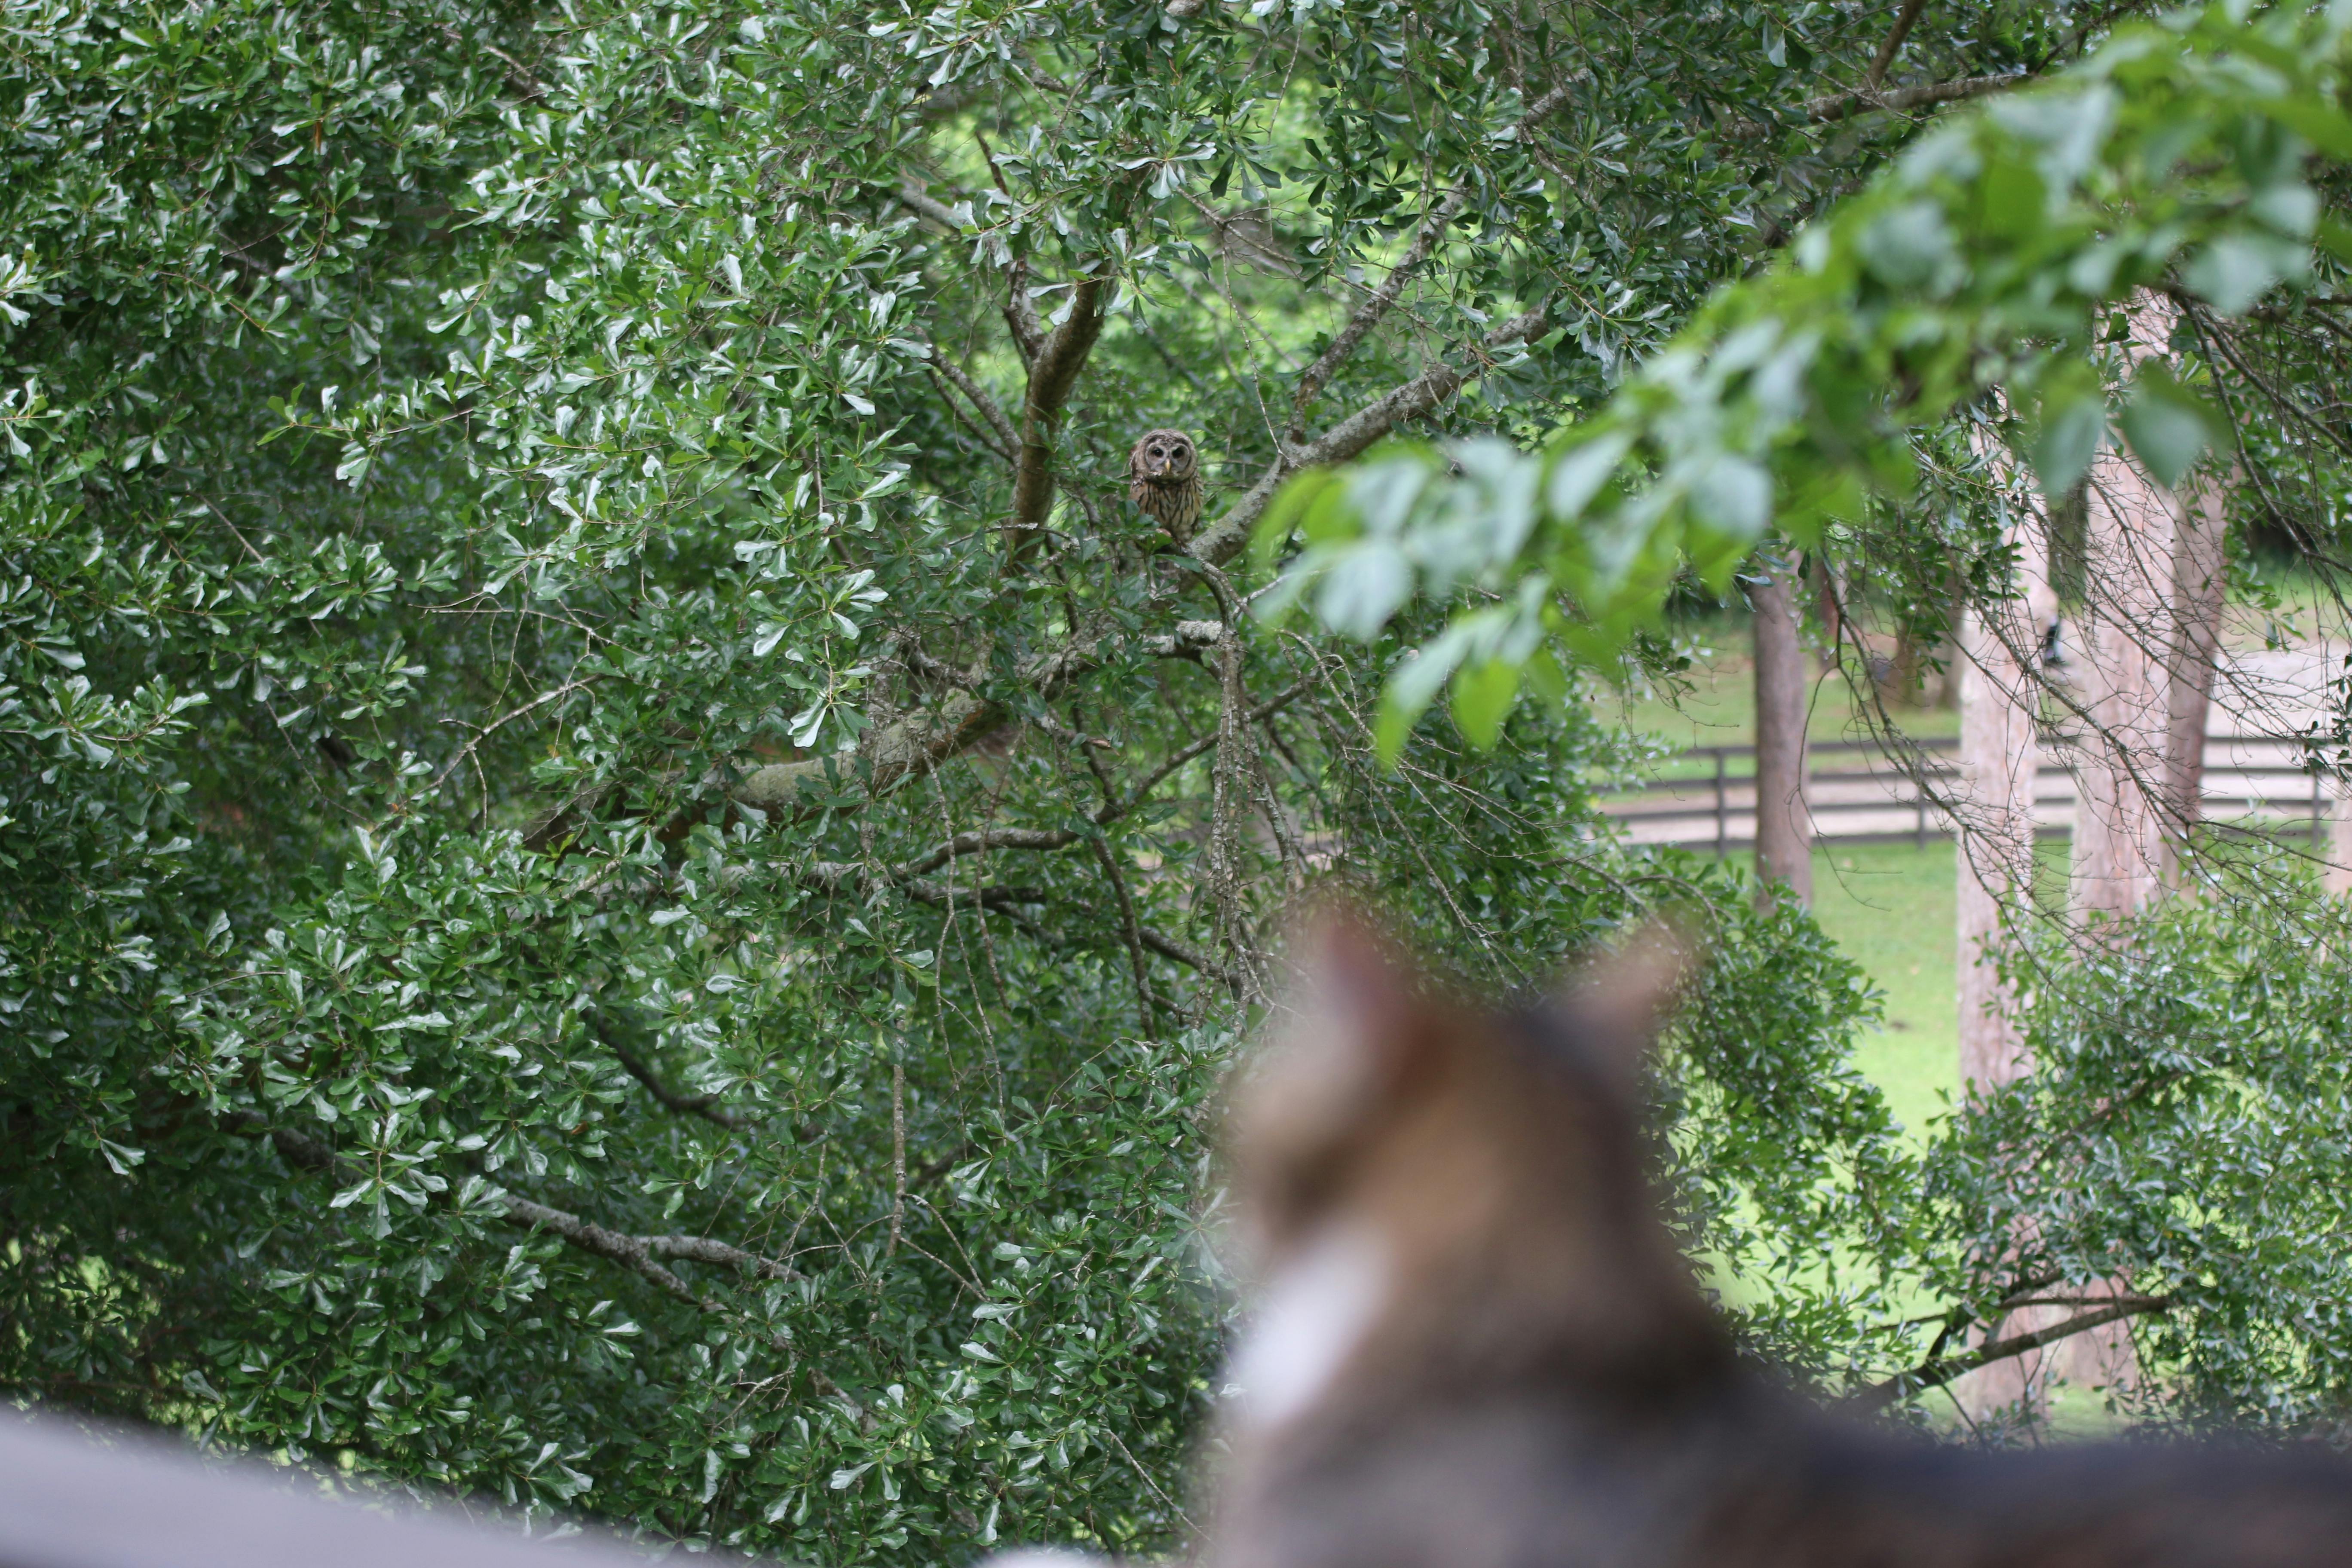 A picture of an owl and Mo's cat Tucker having a stare-down-